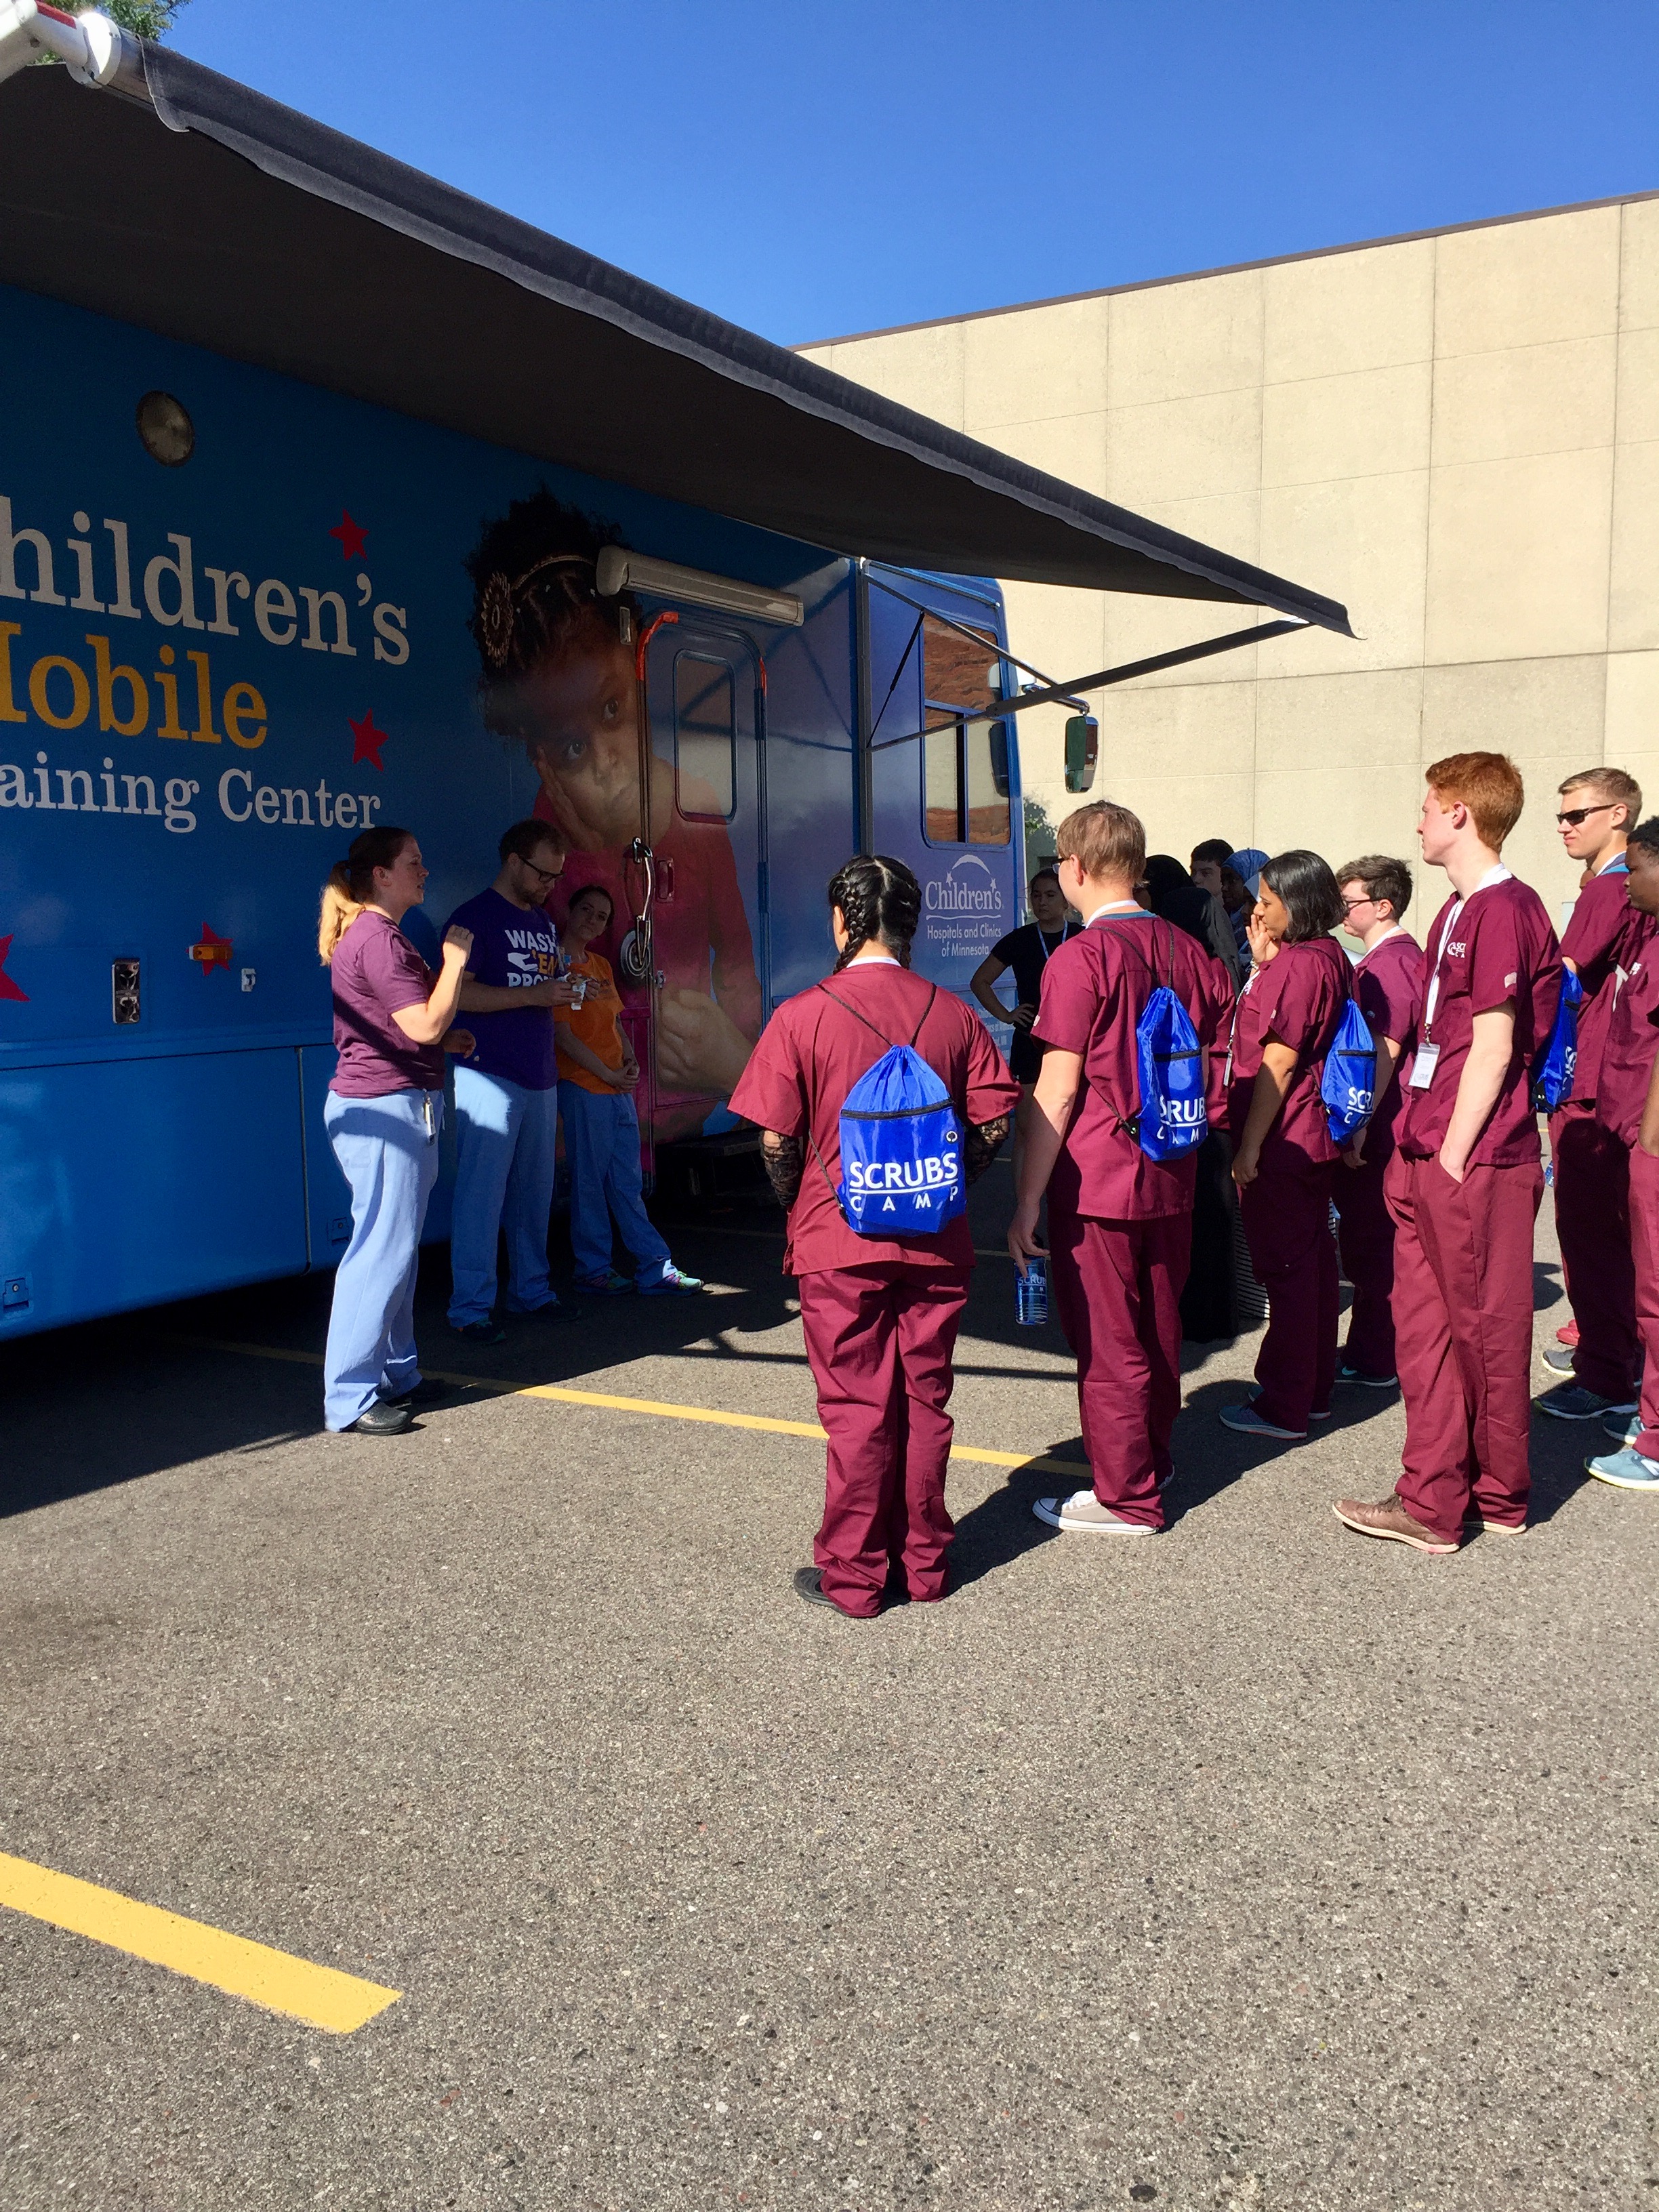   On day two of camp, students got the chance to try their hand at pediatric care. Children’s hospital was on-site with their training simulation van. The advanced equipment offered students the opportunity to train like practicing healthcare profess